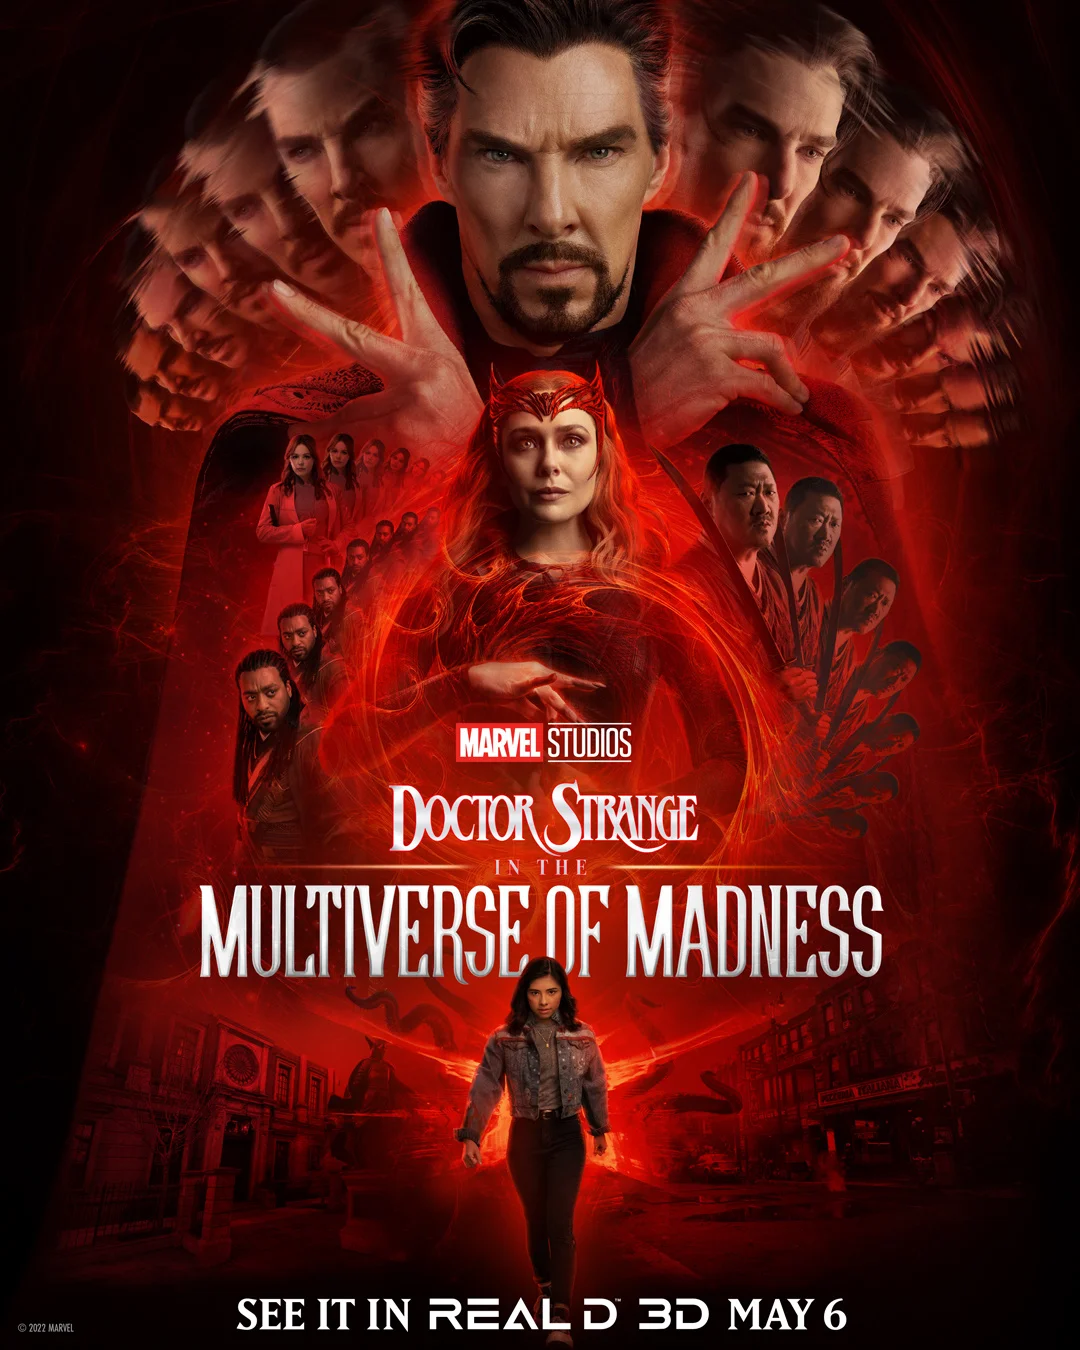 "Doctor Strange in the Multiverse of Madness" Releases New Trailer and IMAX, Dolby Cinema, RealD 3D, ScreenX Multi-Format Posters